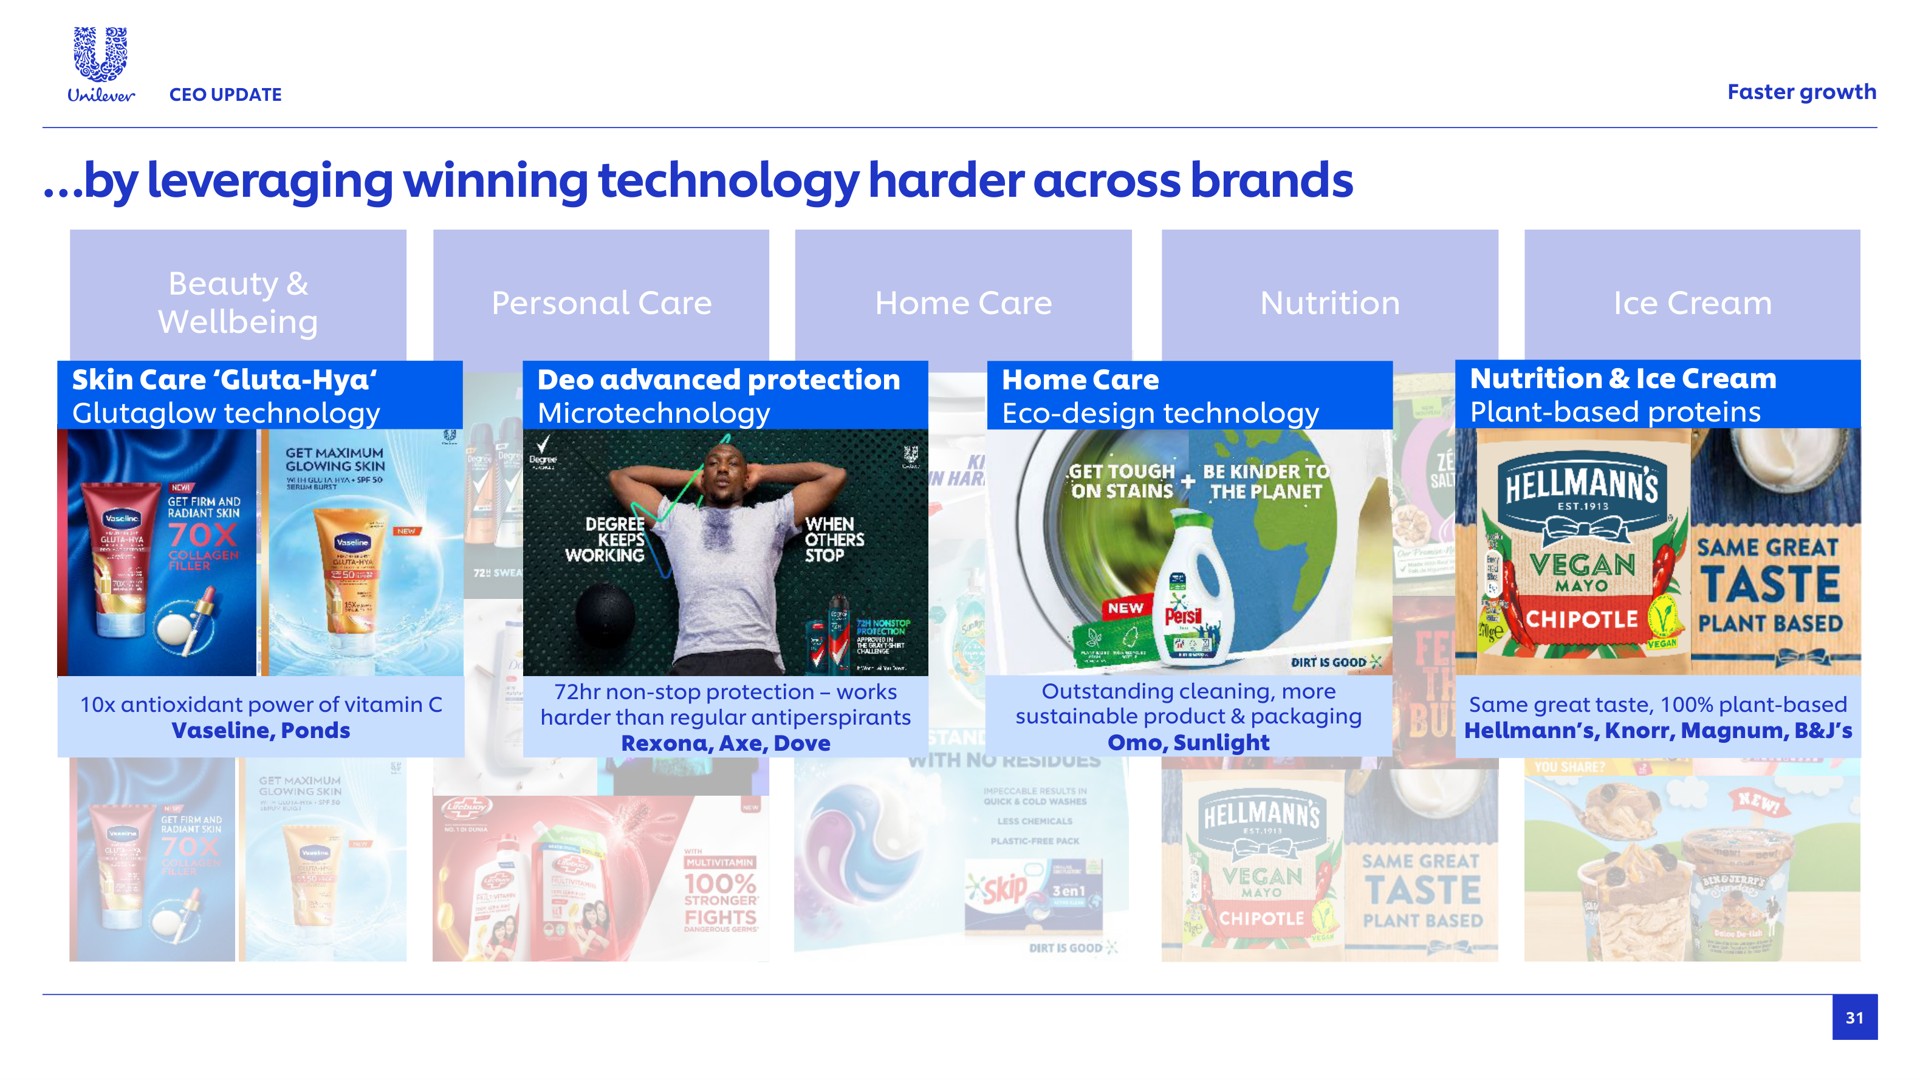 by leveraging winning technology harder across brands i skin care advanced protection ree keeps working home care design cum a pia scare antioxidant power of vitamin ponds non stop protection works than regular axe dove outstanding cleaning more sustainable product packaging sunlight faster growth plant based proteins same great taste byes magnum | Unilever